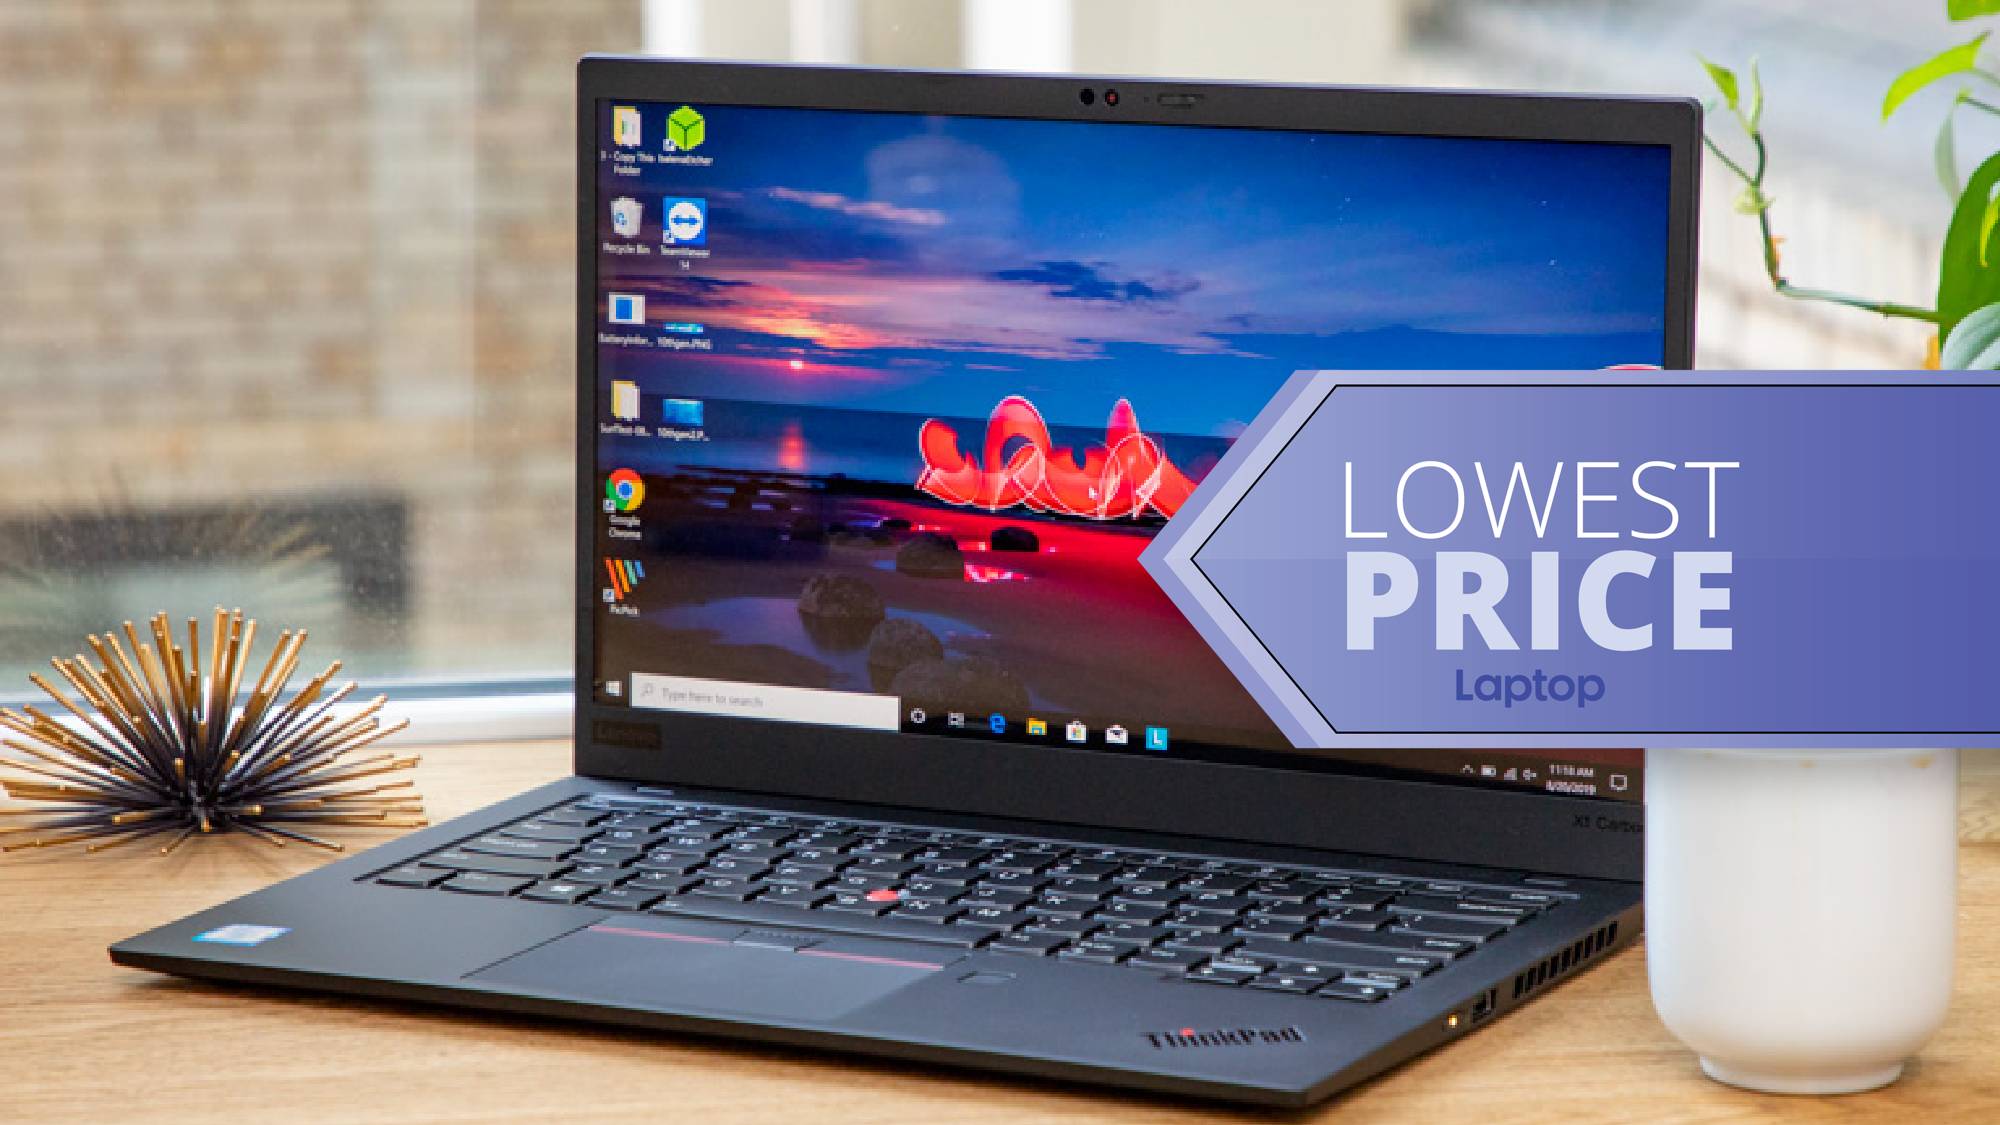 Lenovo's ThinkPad X1 Carbon is one of the best laptops ever and 50 off